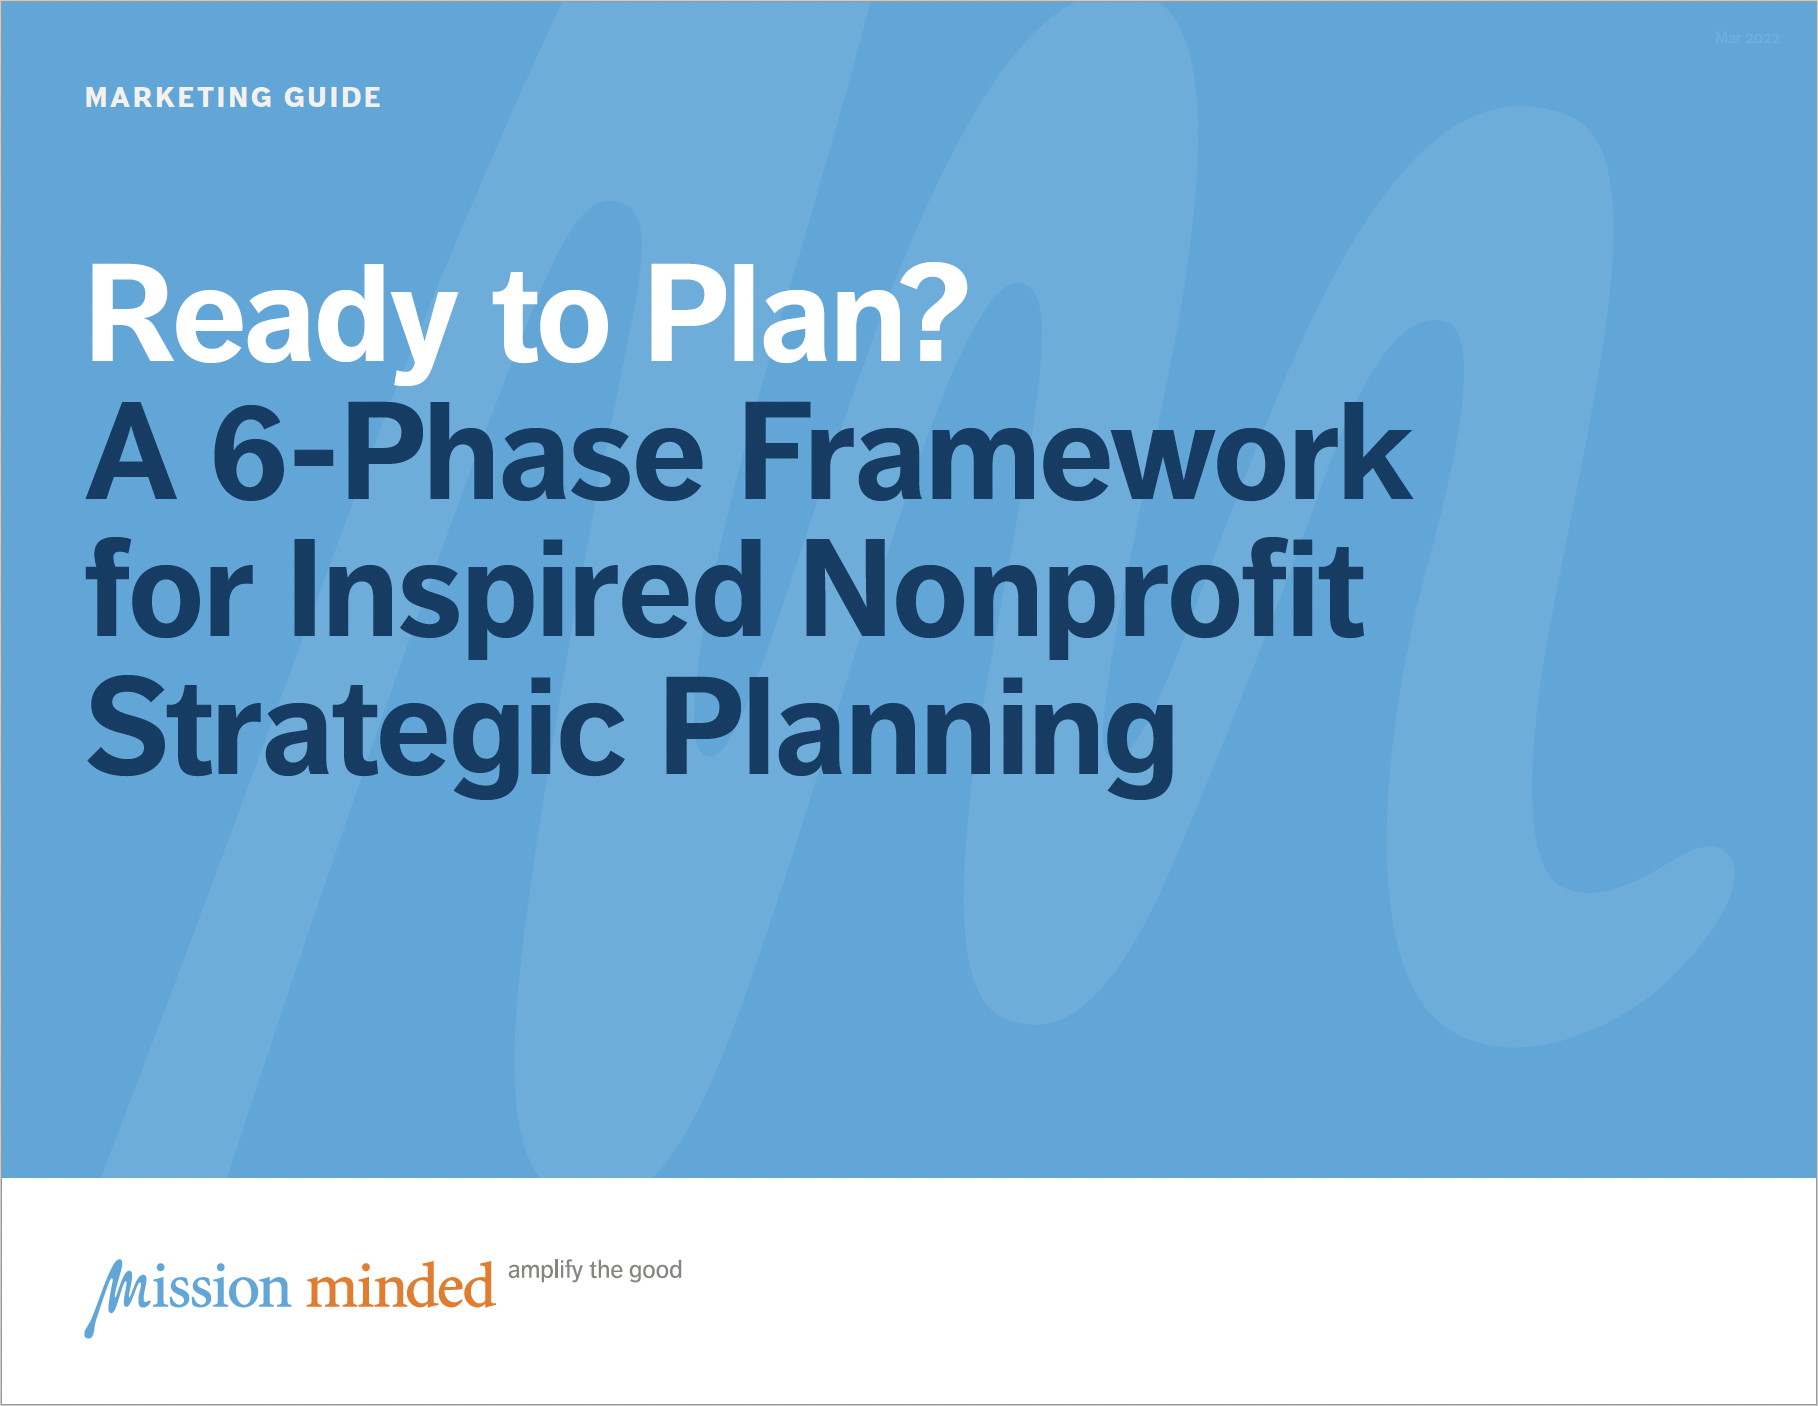 Ready to Plan? | A 6-Phase Framework for Inspired Nonprofit Strategic Planning